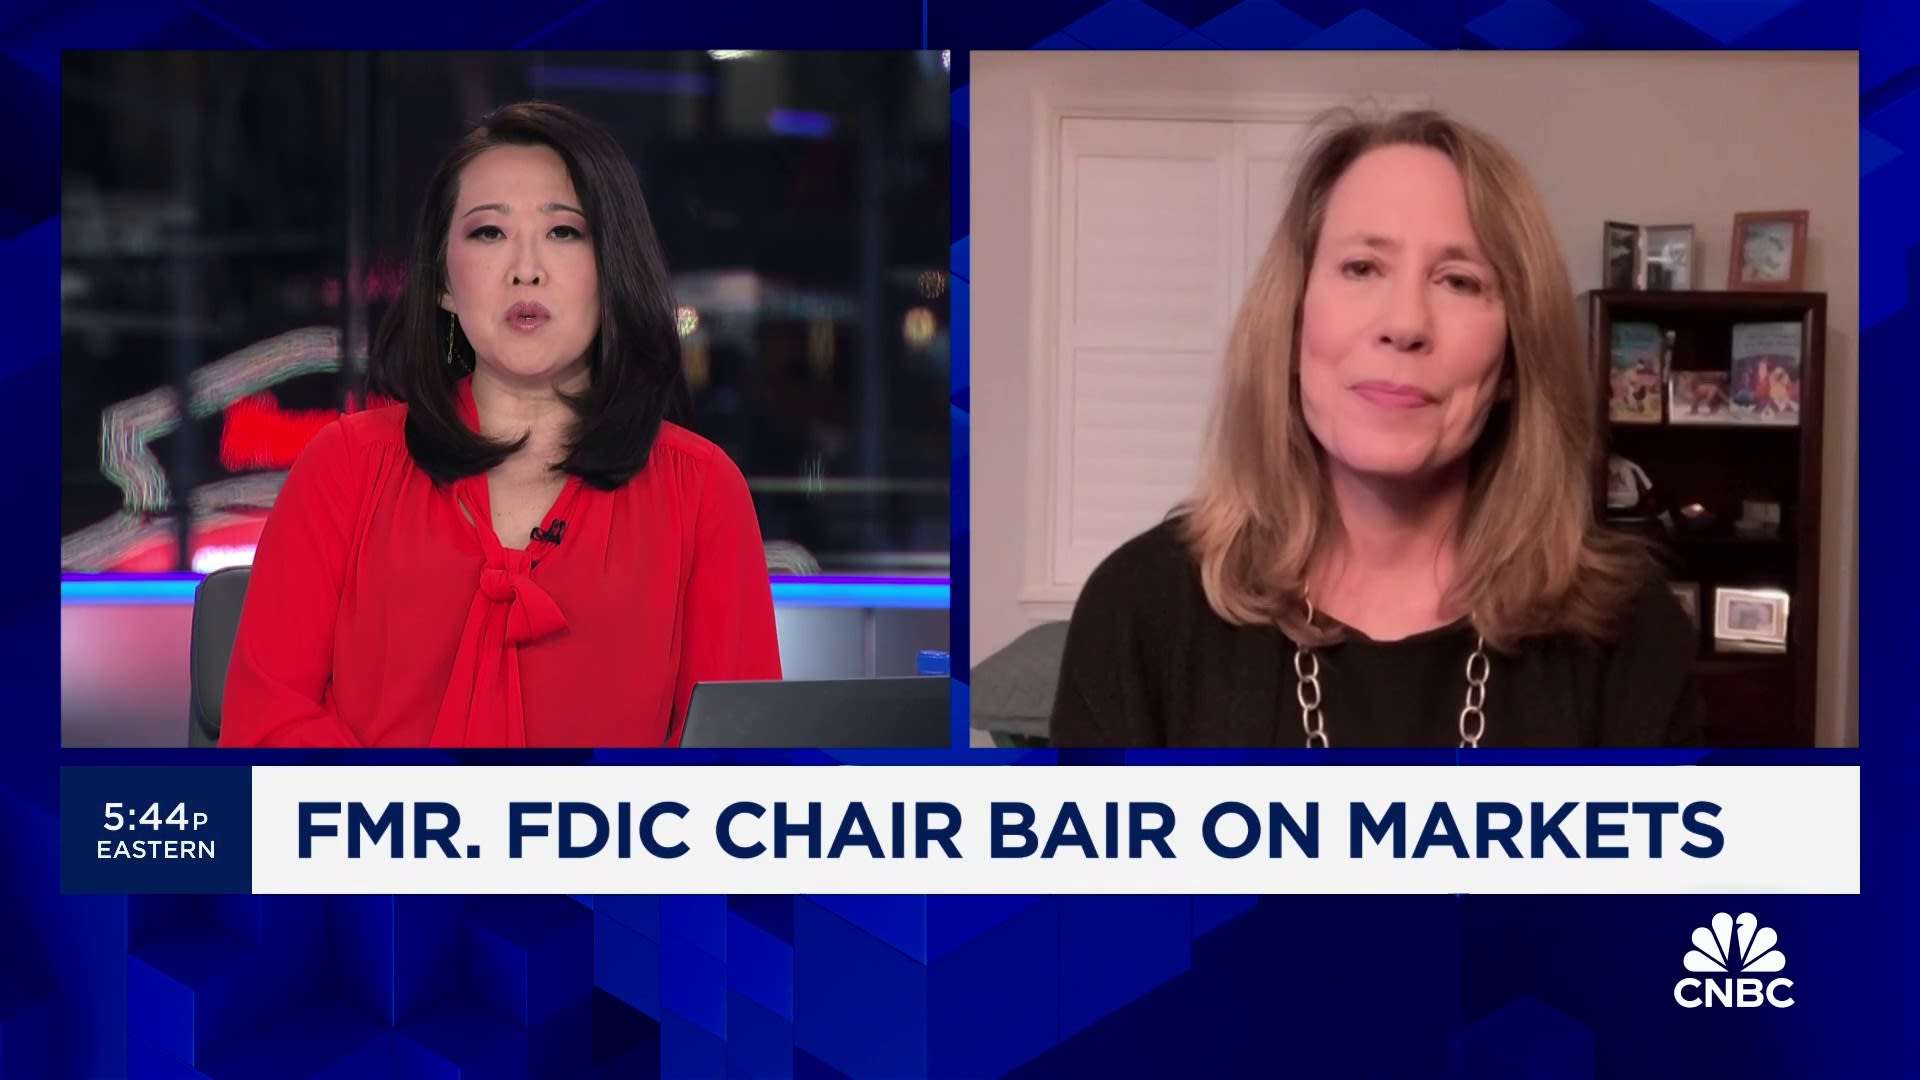 Wall Street too optimistic about potential interest rate cuts, says former FDIC Chair Sheila Bair